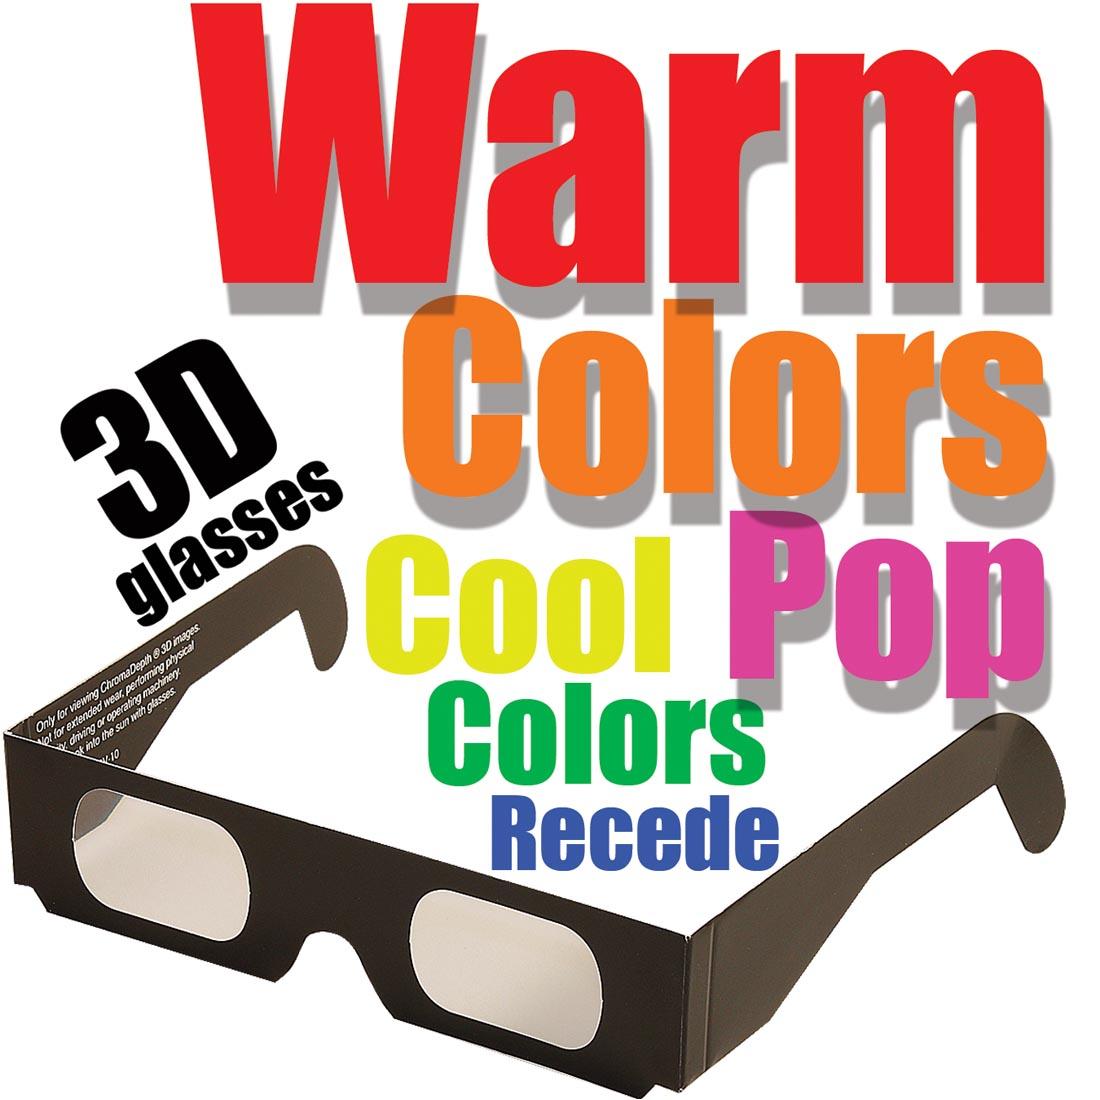 3D Glasses with the text Warm Colors Pop Cool Colors Recede